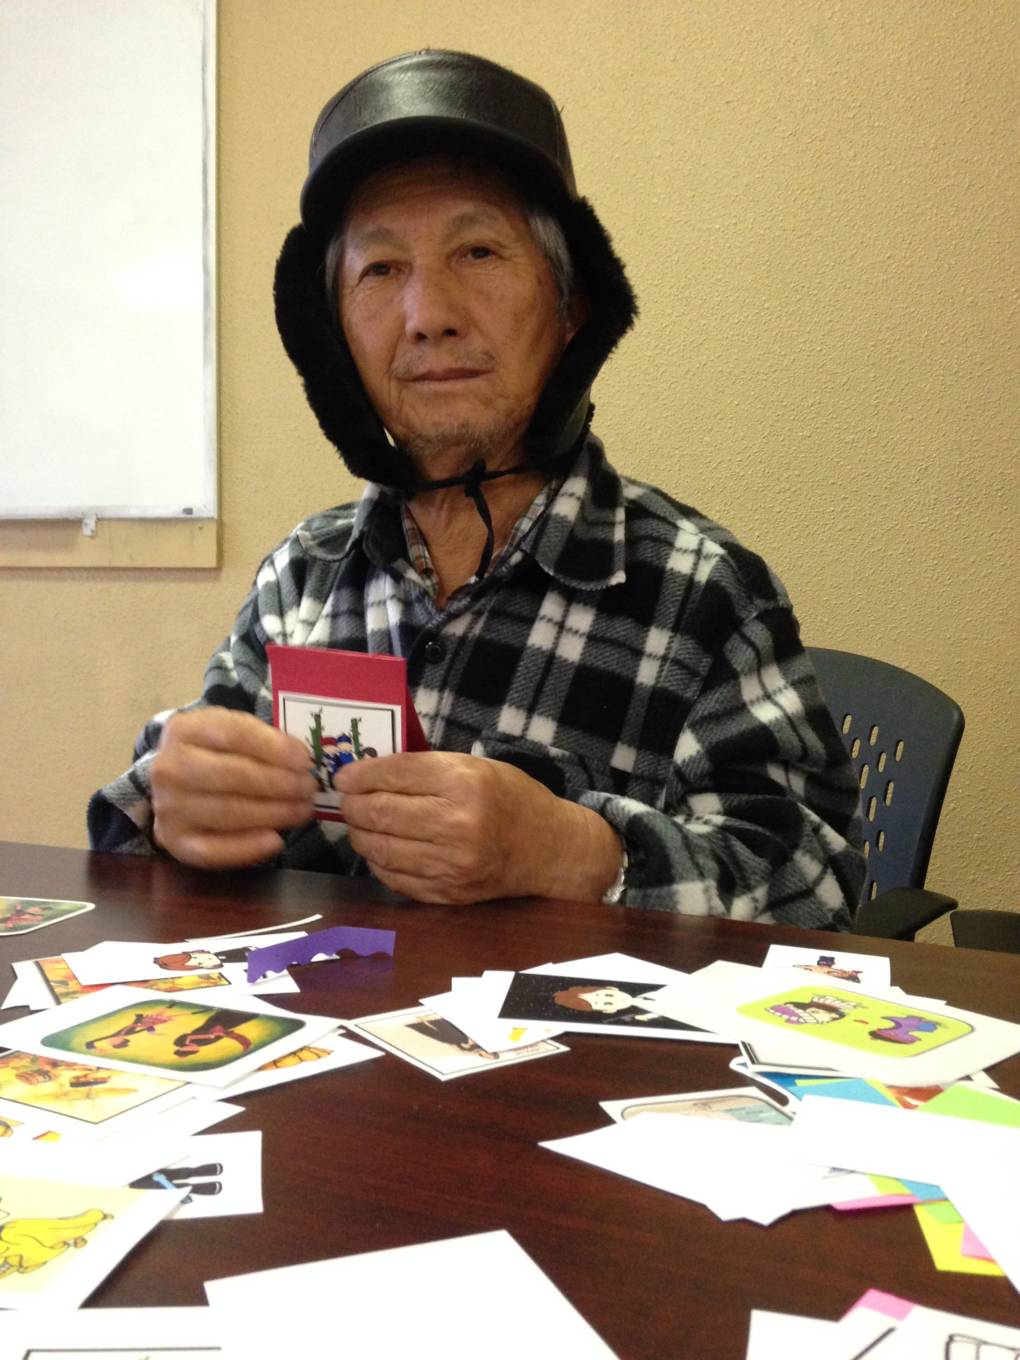 Vong Vang Xiong fought in Laos for six years in the CIA's Secret War. He does group crafts to help deal with depression.